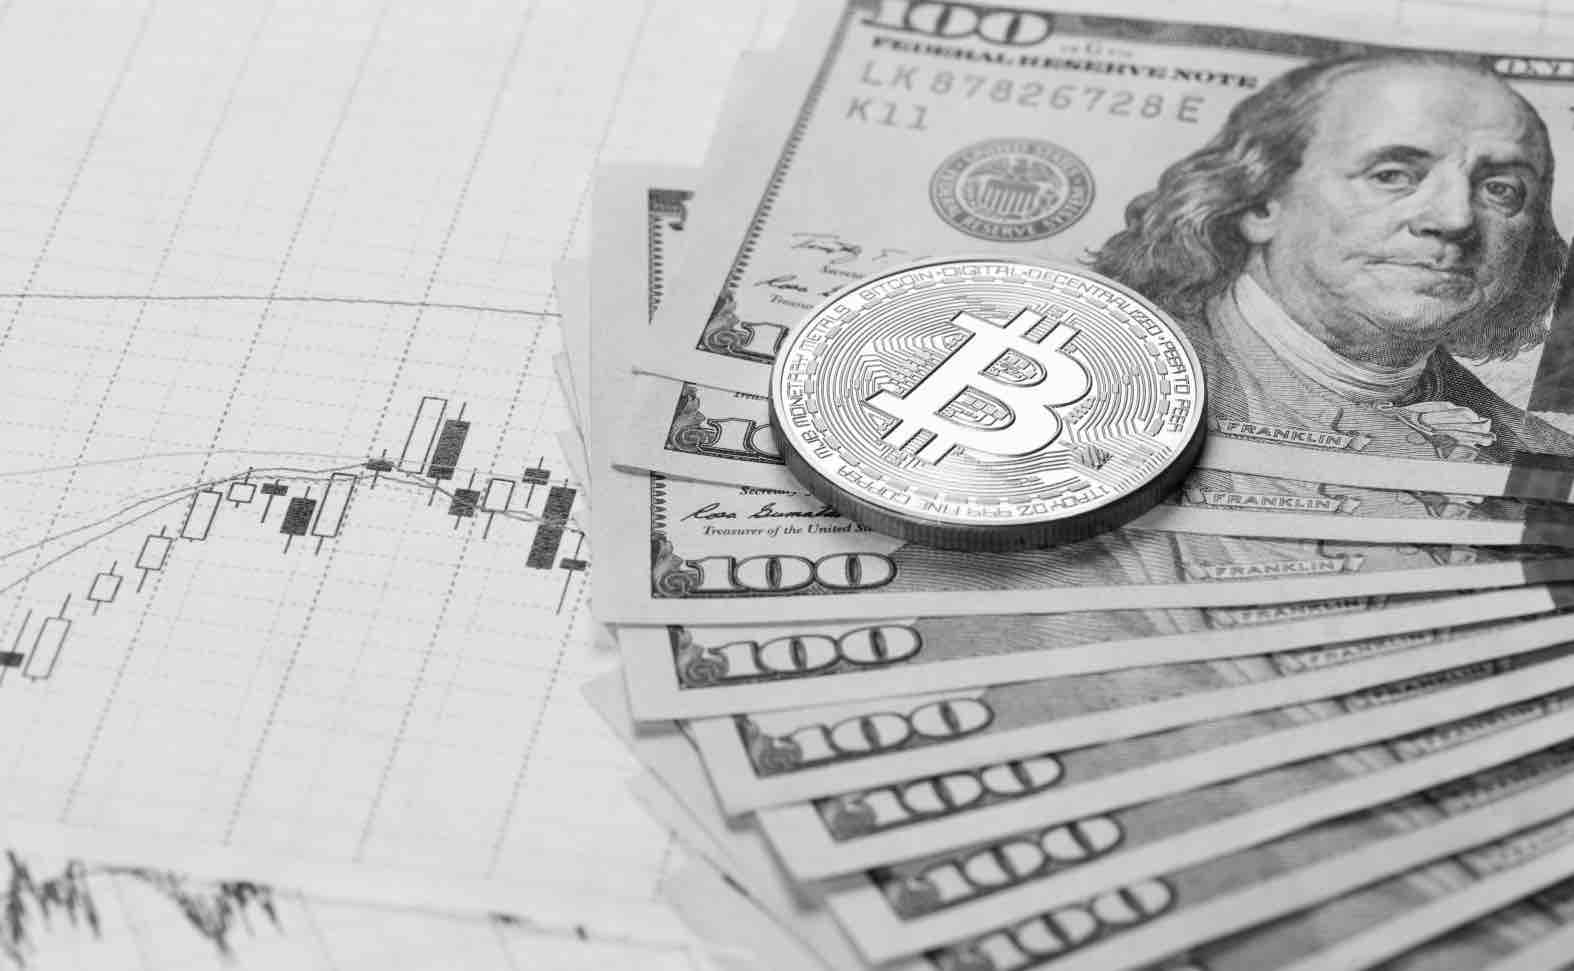 Bitcoin’s 5-year ROI outperforms major banks stocks’ by over 4000% on average